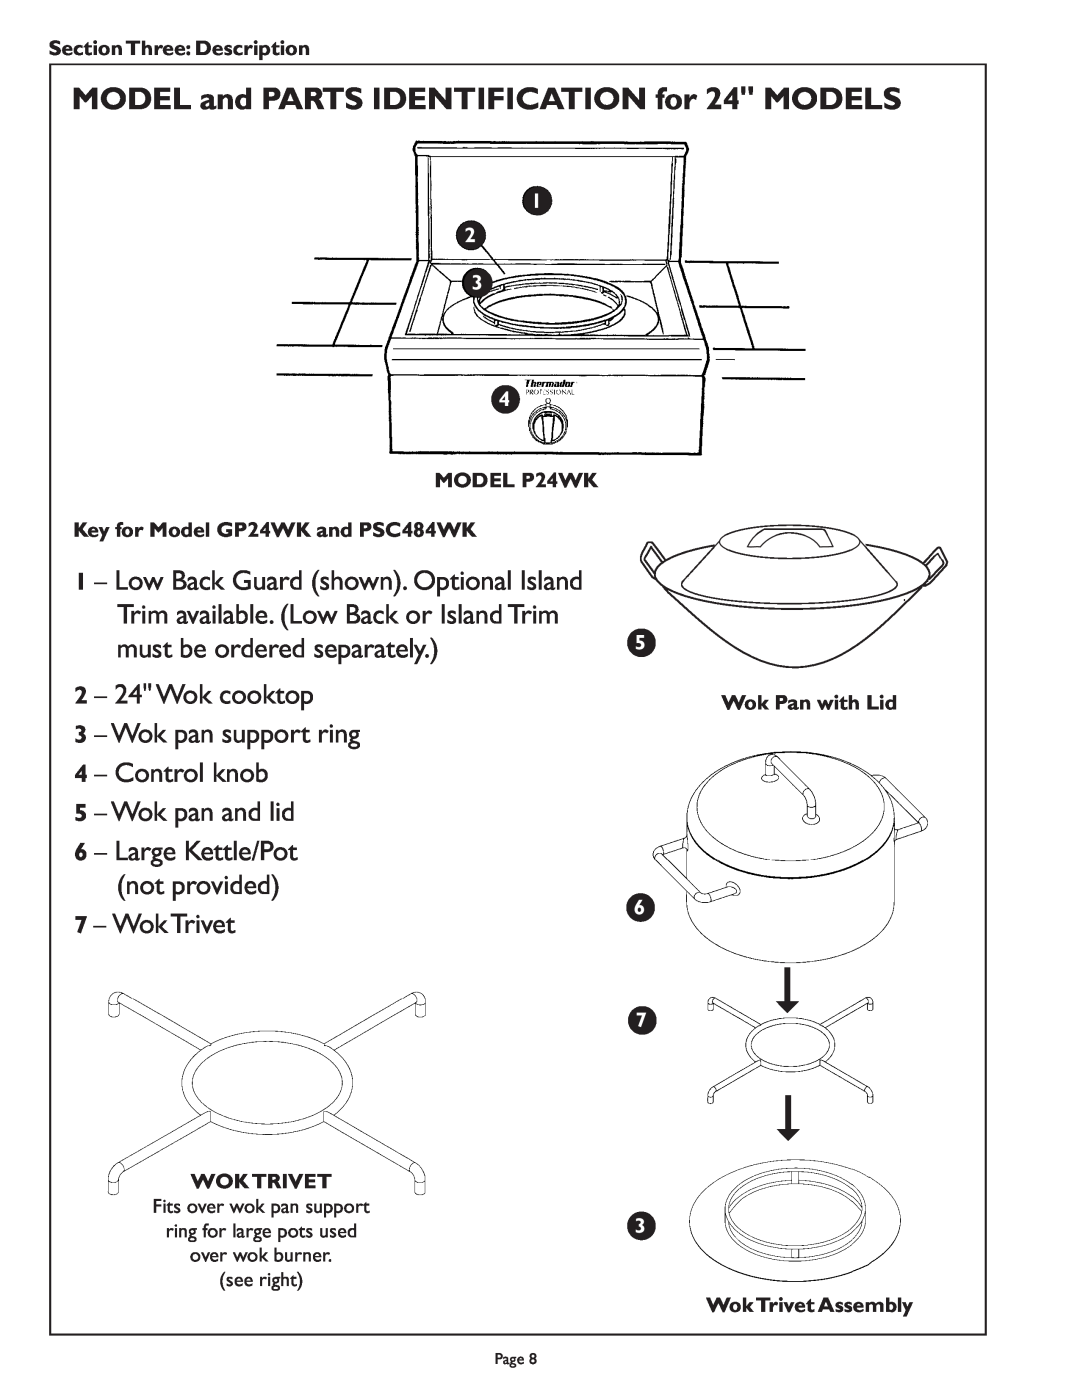 Range Kleen PSC364GD MODEL and PARTS IDENTIFICATION for 24 MODELS, Trim available. Low Back or Island Trim, Wok cooktop 